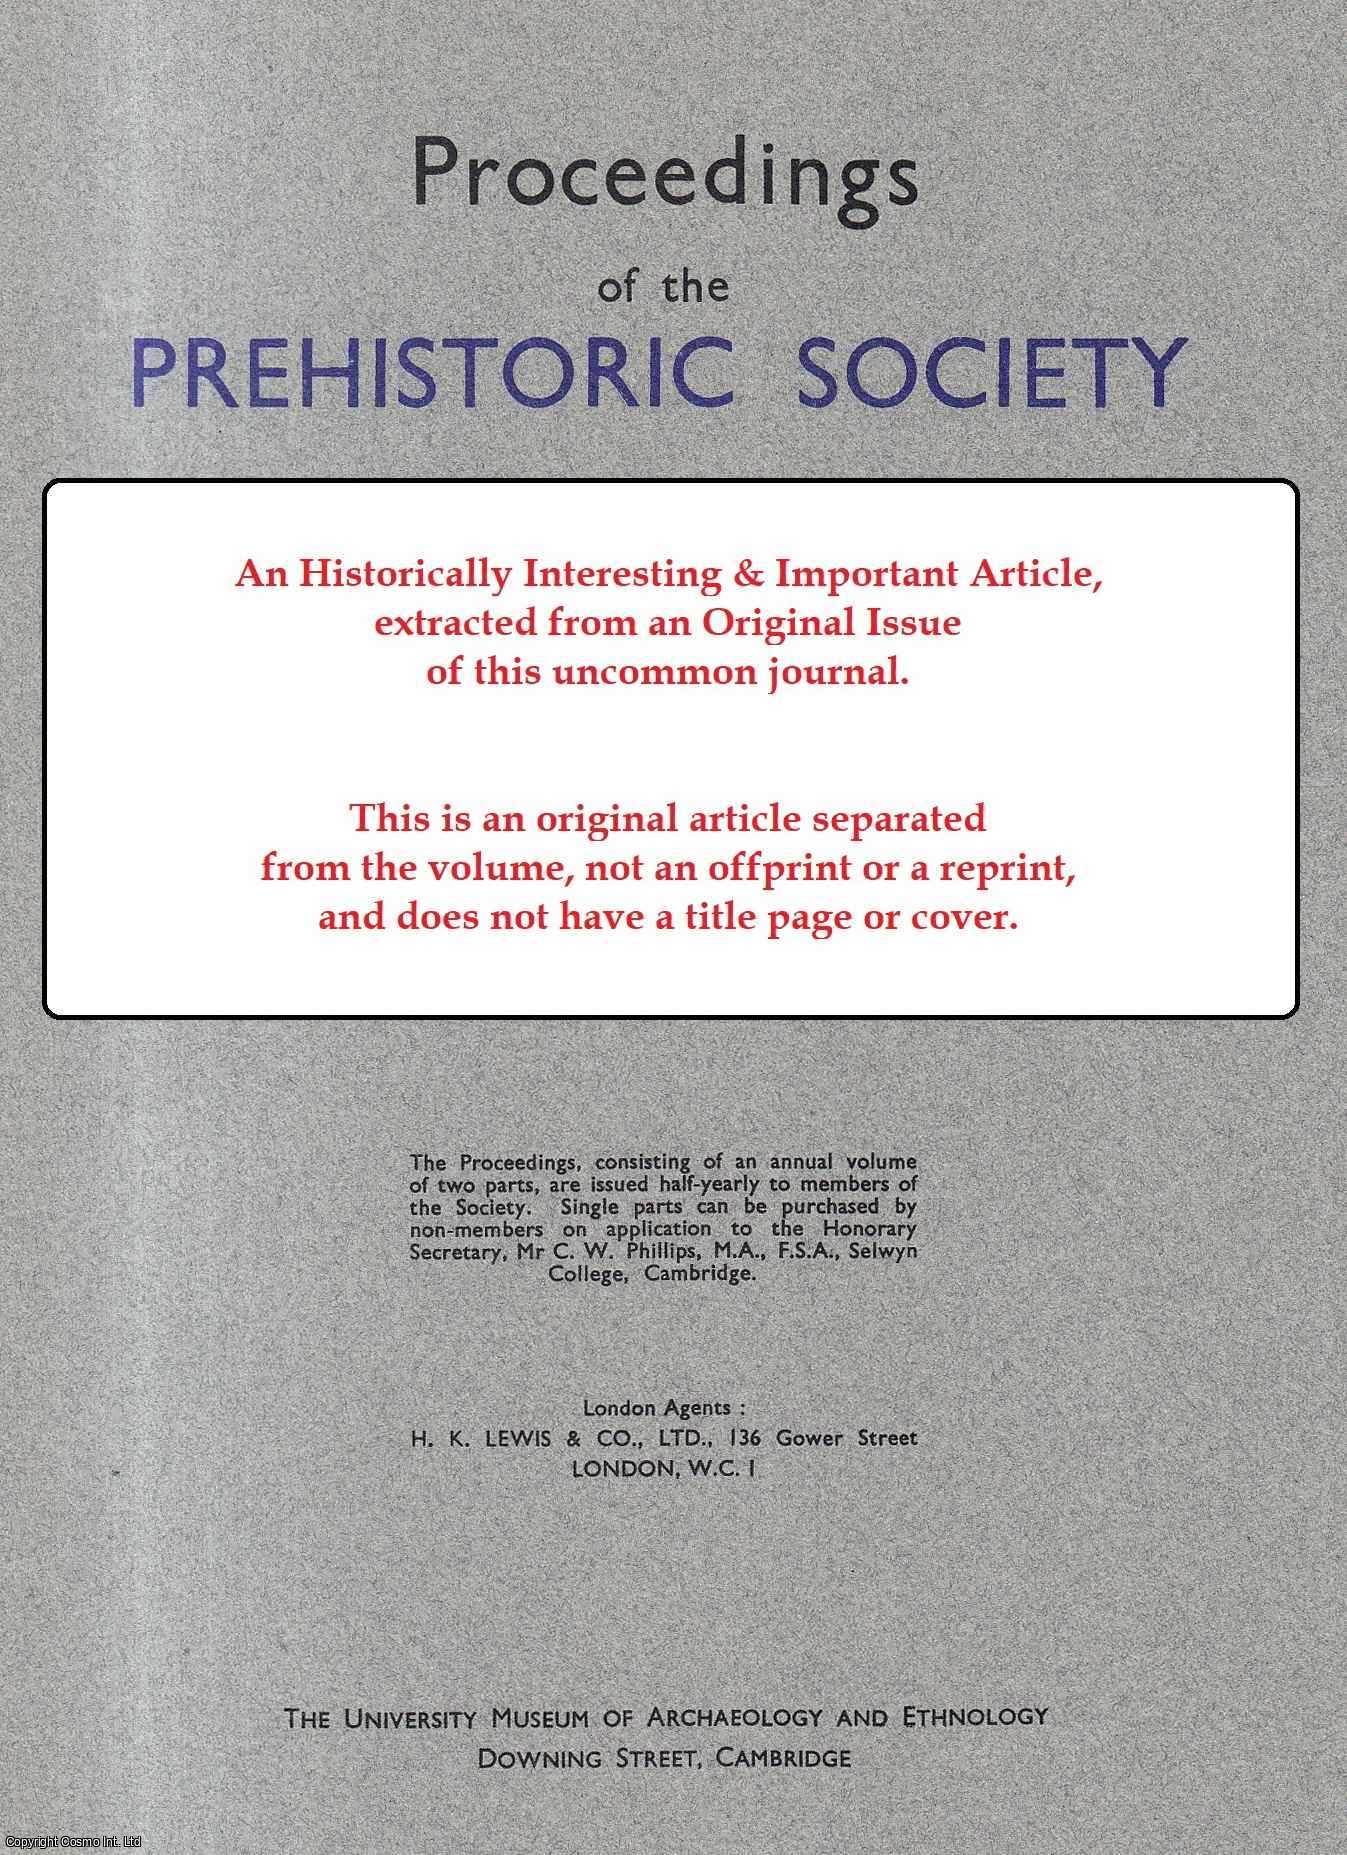 M. C. Burkitt - The Lower Palaeolithic Industries near Warsash Hampshire. An original article from Proceedings of the Prehistoric Society, 1939.